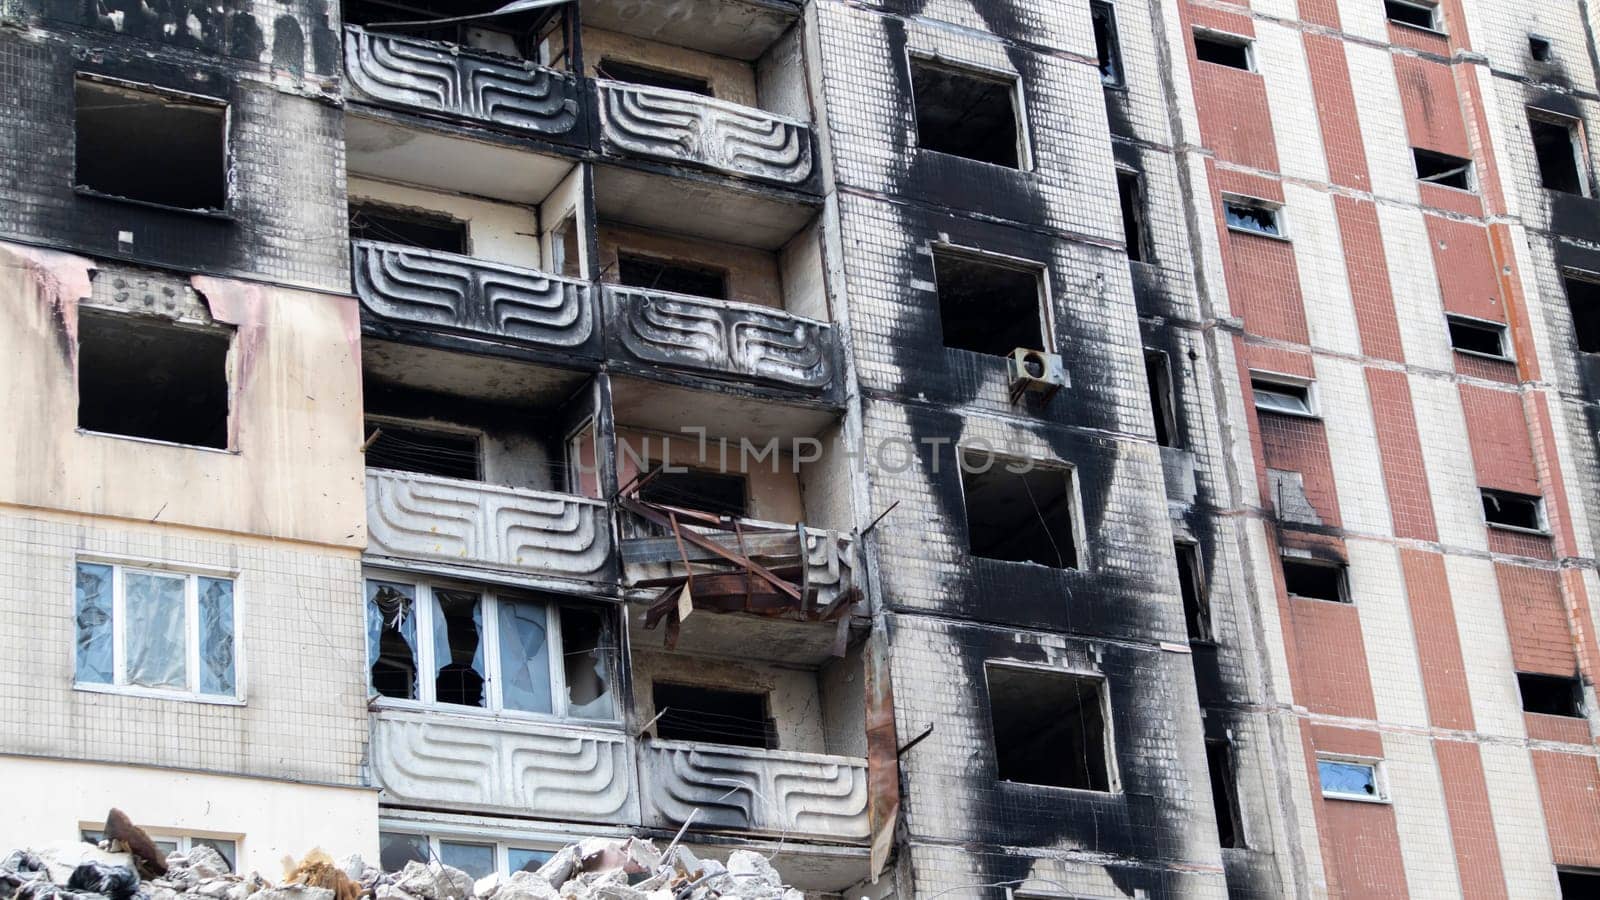 Residential buildings, windows and balconies were damaged by the blast and shrapnel from artillery shelling. The destruction of the city by military operations, the consequences of the war